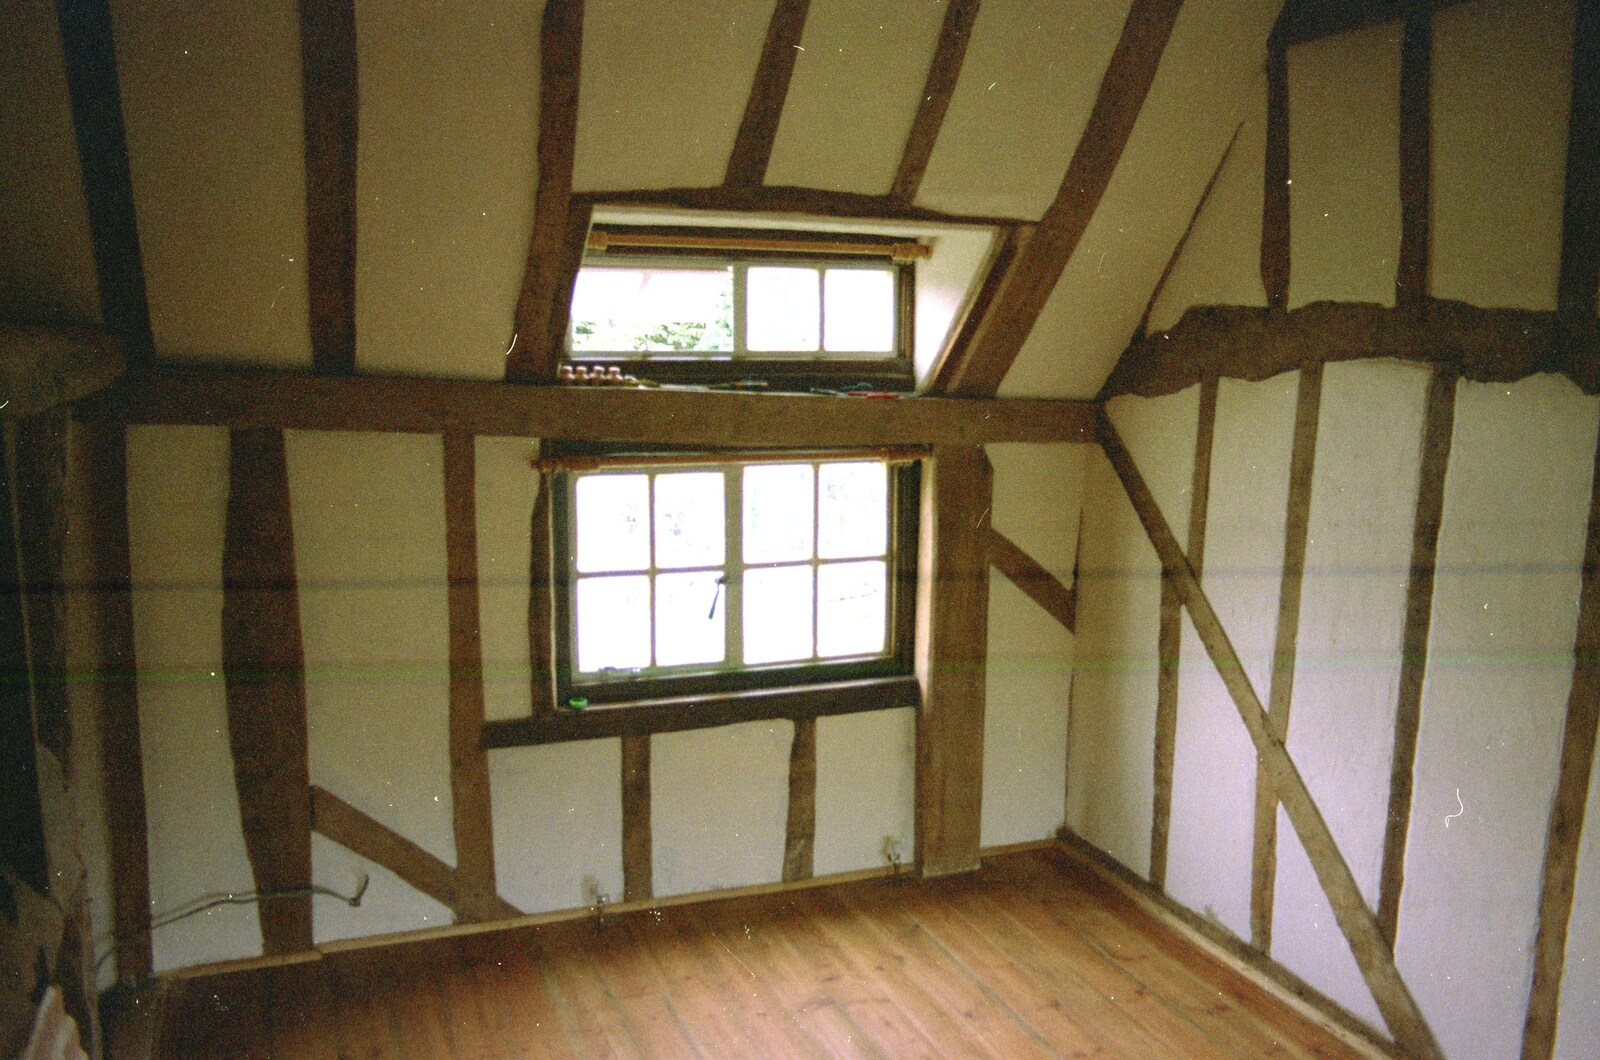 Another reconstructed-bedroom view from Cider Making With Geoff and Brenda, Stuston, Suffolk - 10th September 1998